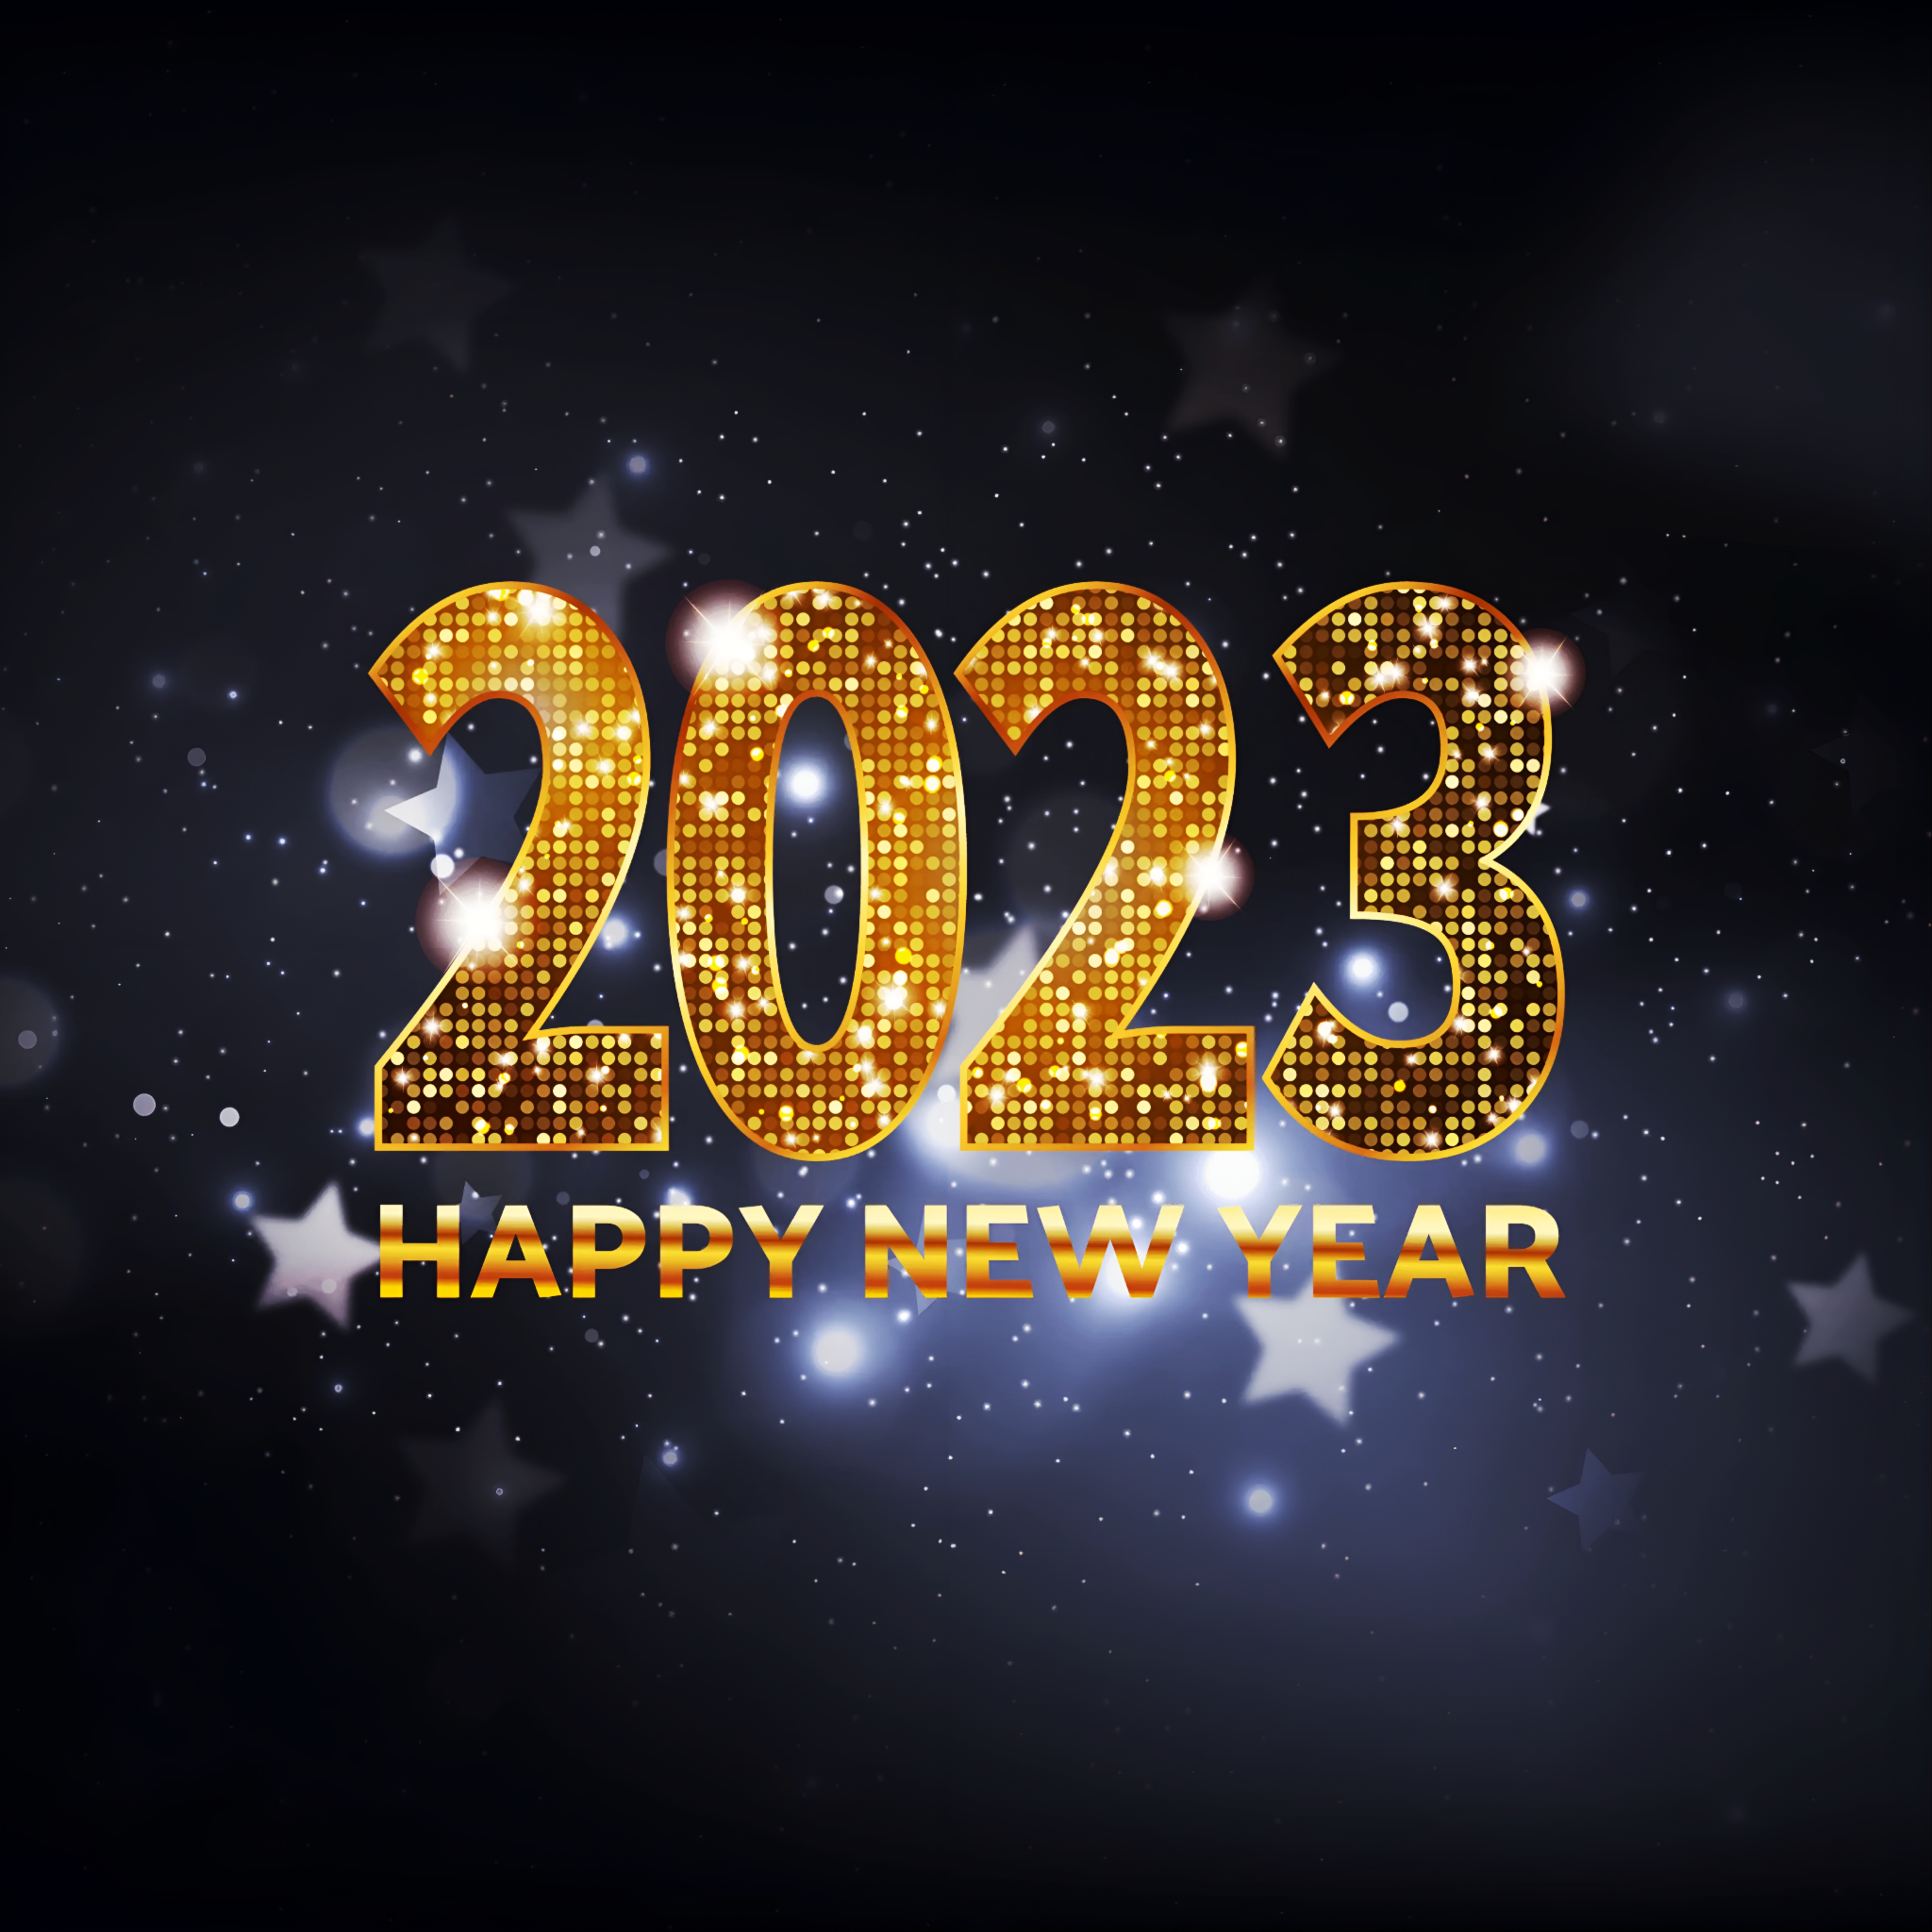 Happy New Year 2023 Image HD Download